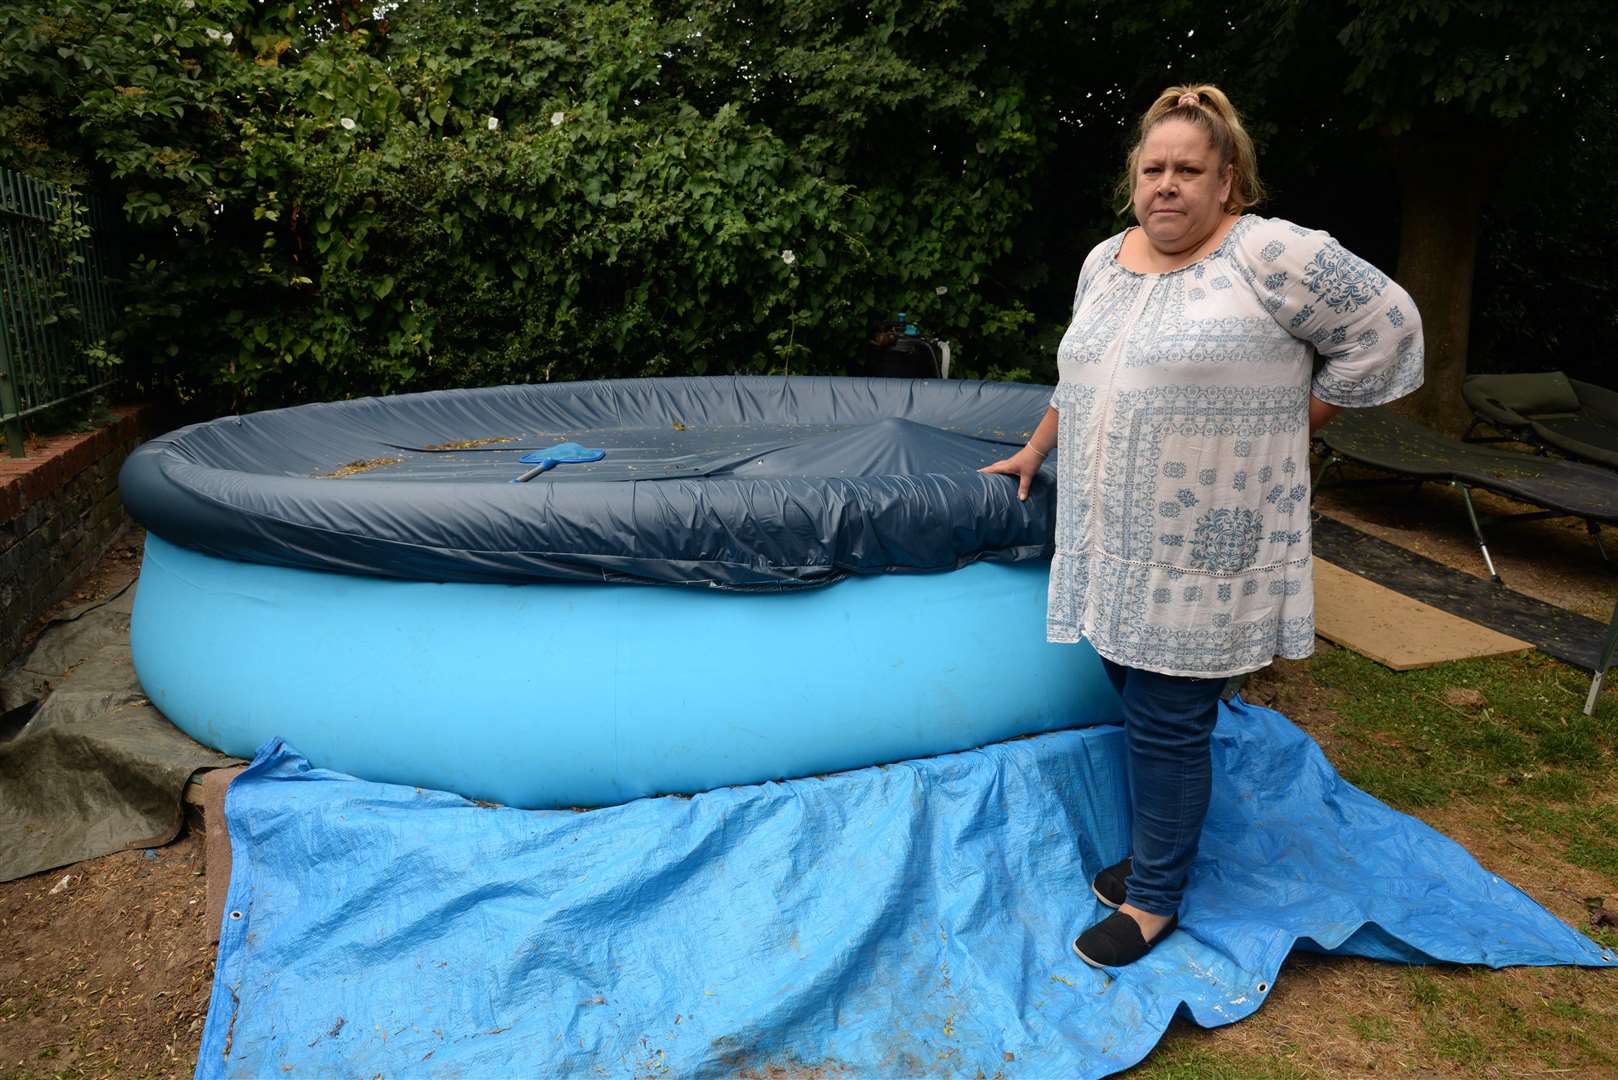 The neighbours have been ordered to let out the water on health and safety grounds